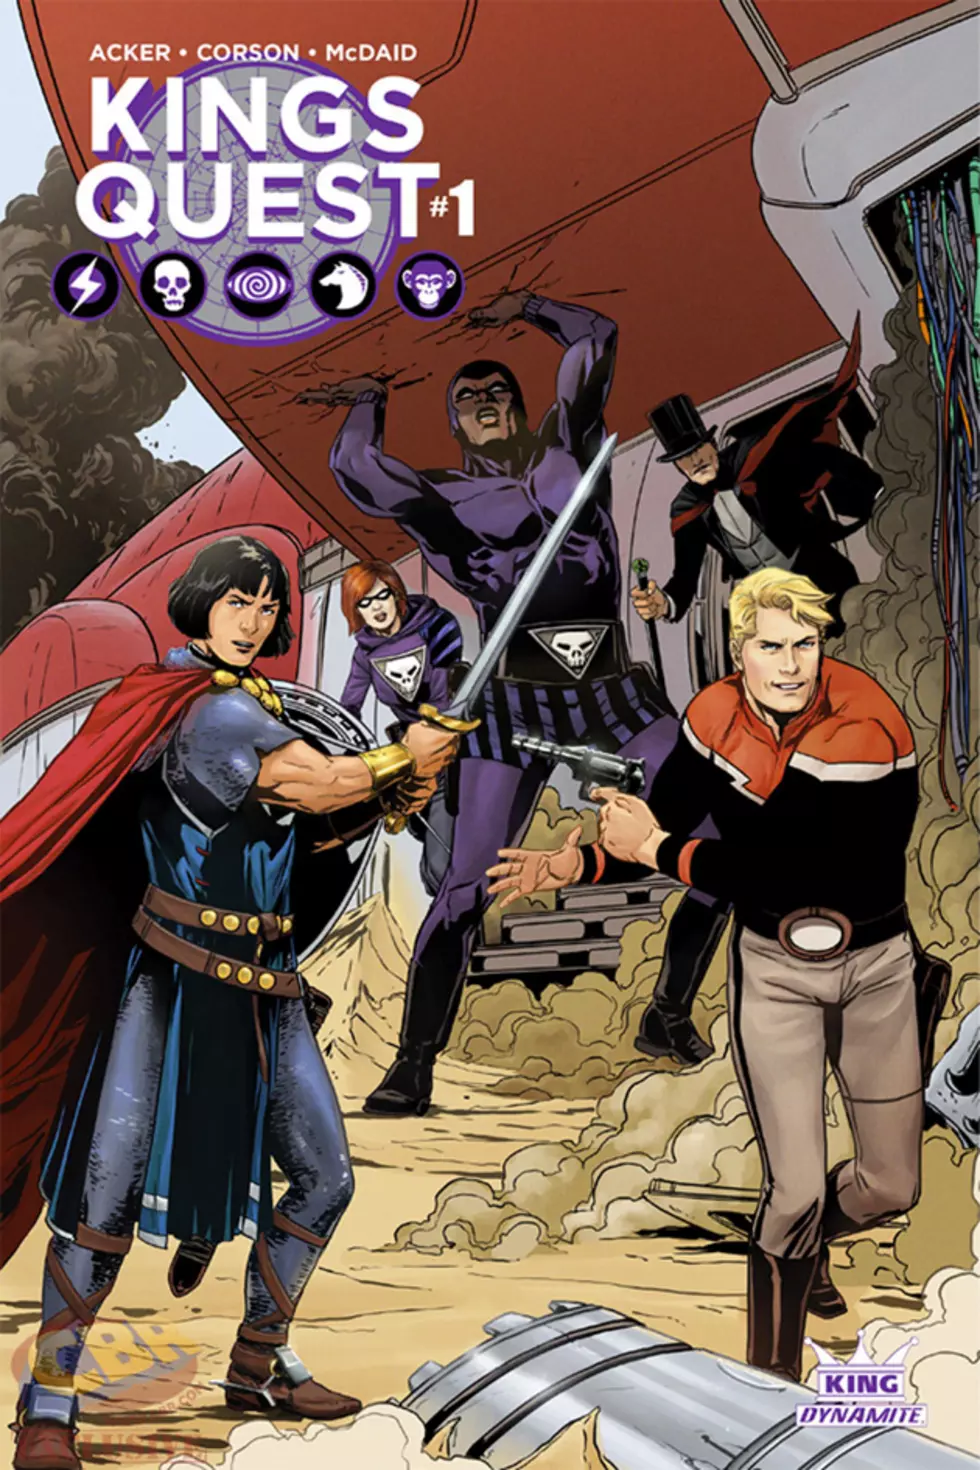 Flash Gordon, The Phantom, Prince Valiant And More Are Back In &#8216;Kings Quest&#8217; In May